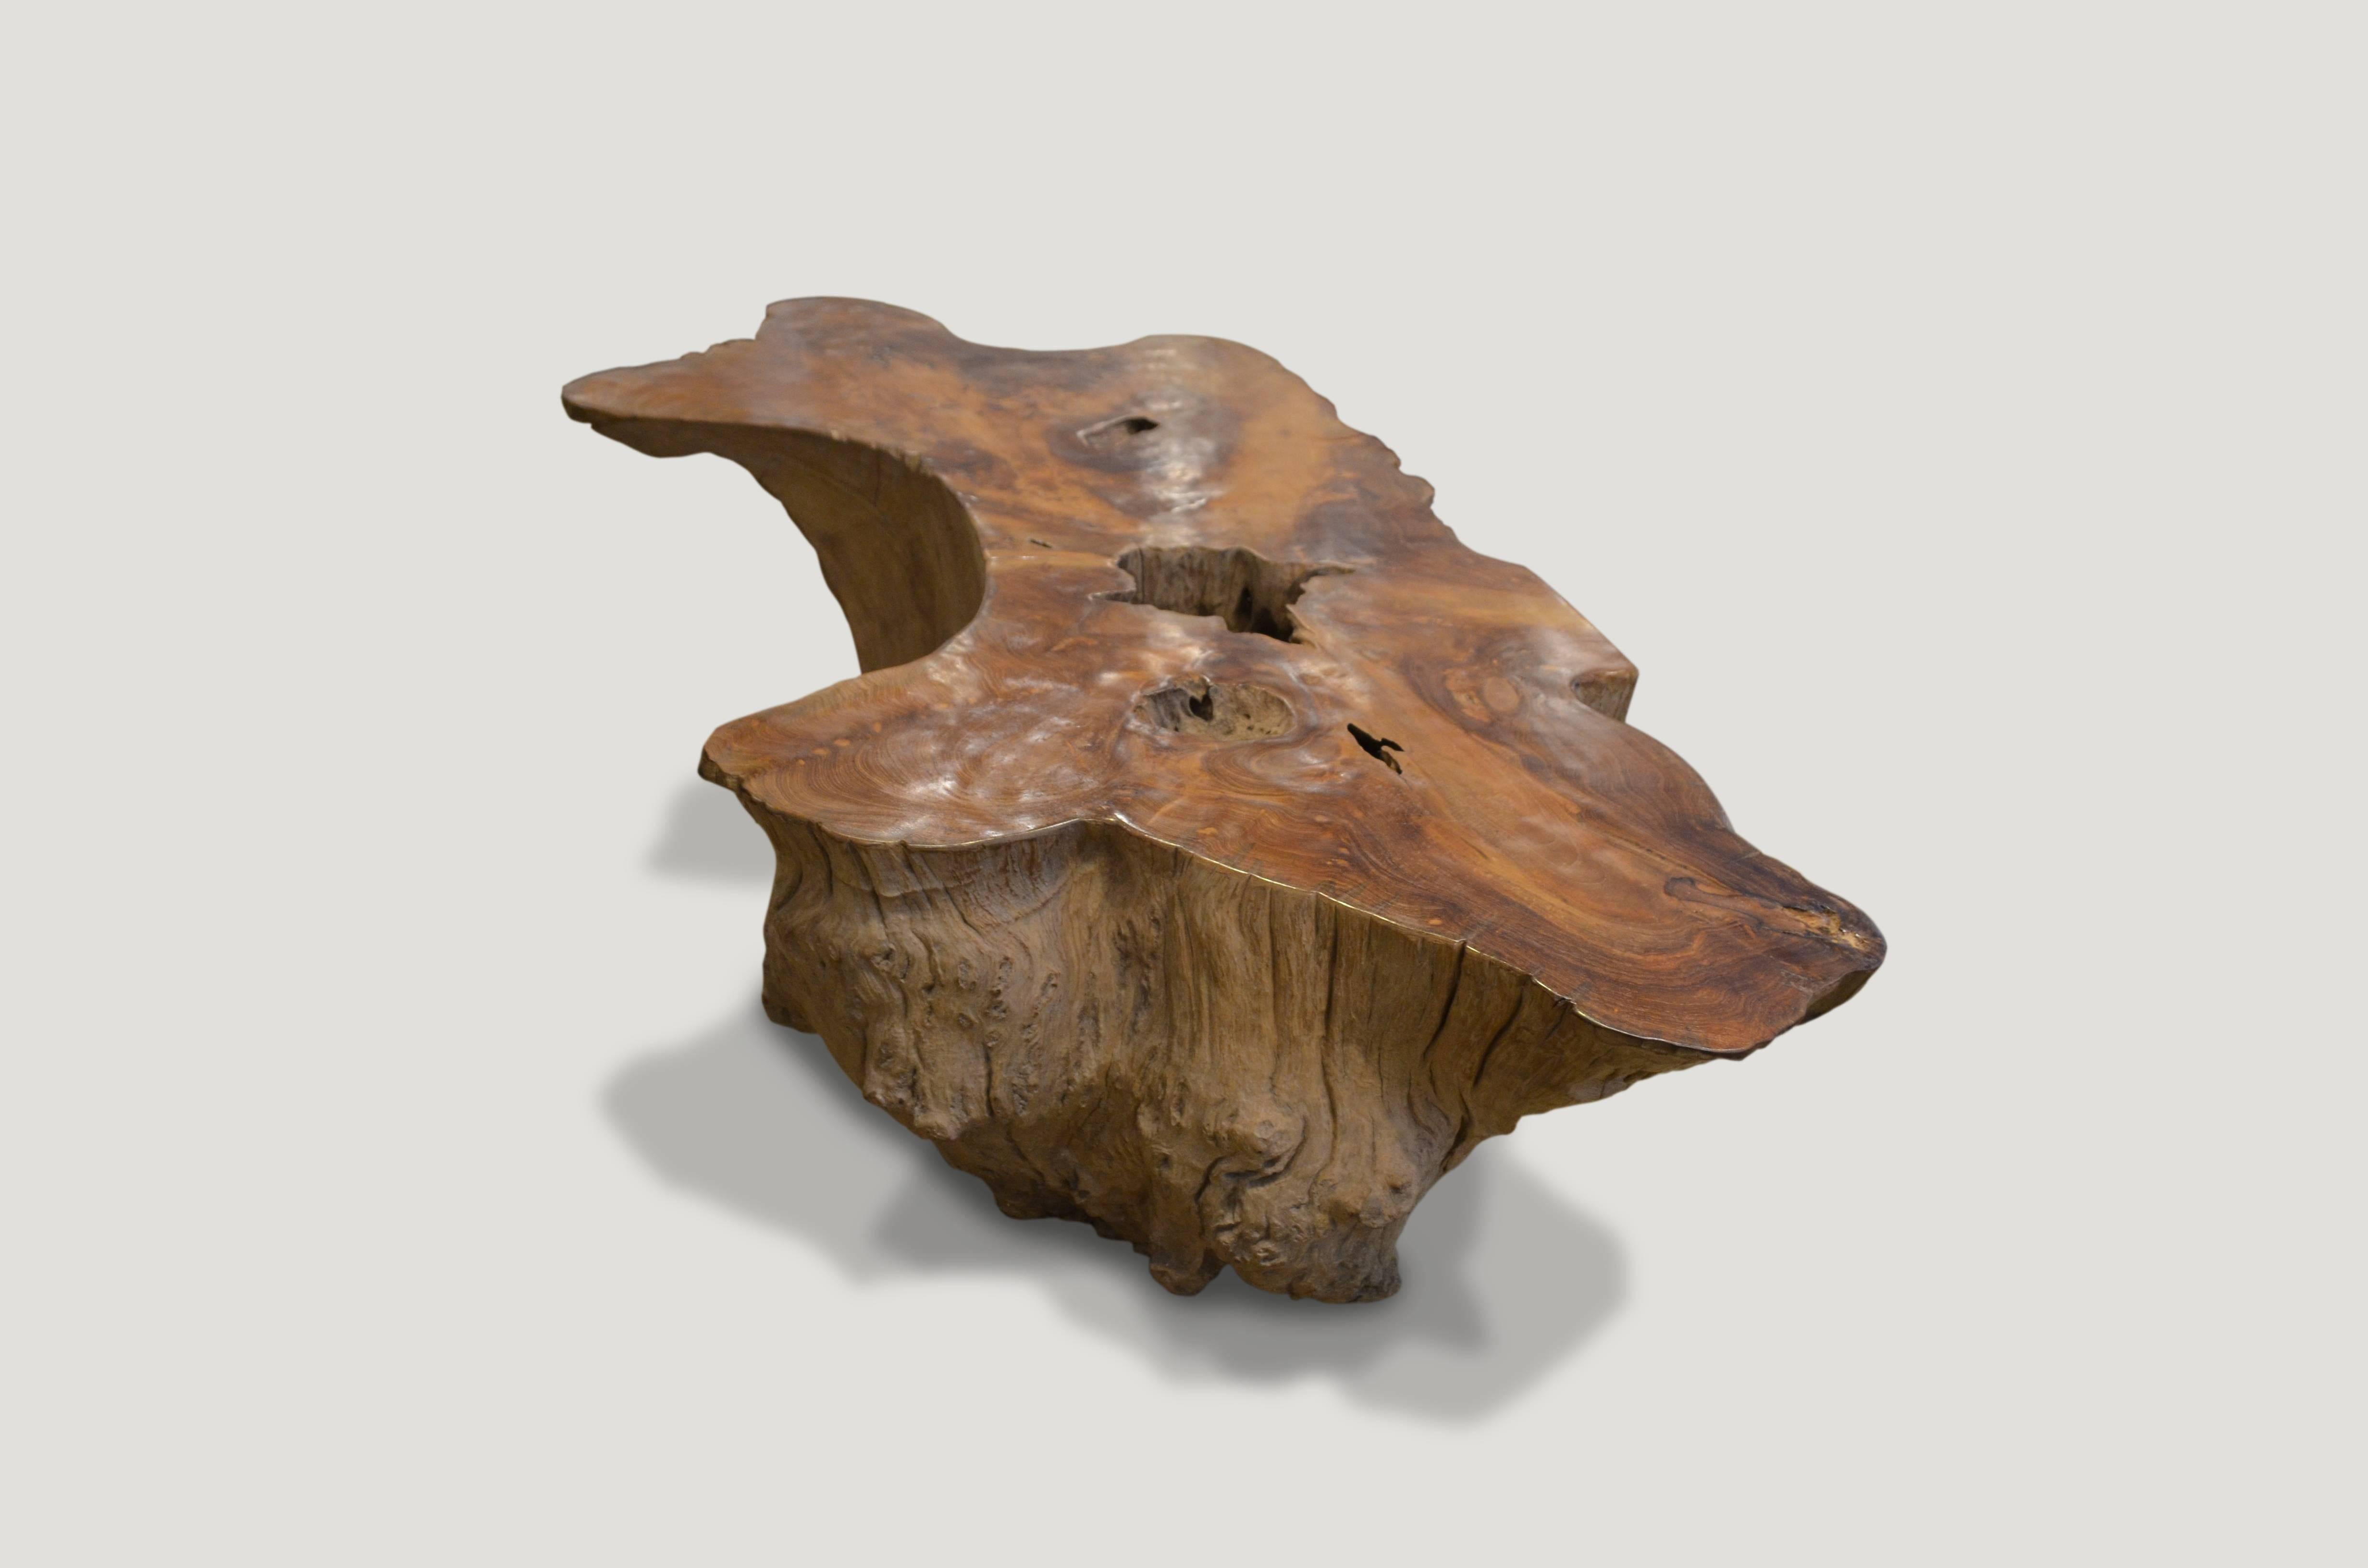 Solid reclaimed teak root coffee table. We polished the top and left the sides raw.

Measures: 62 x 31 – 18 wide x 15″ high.